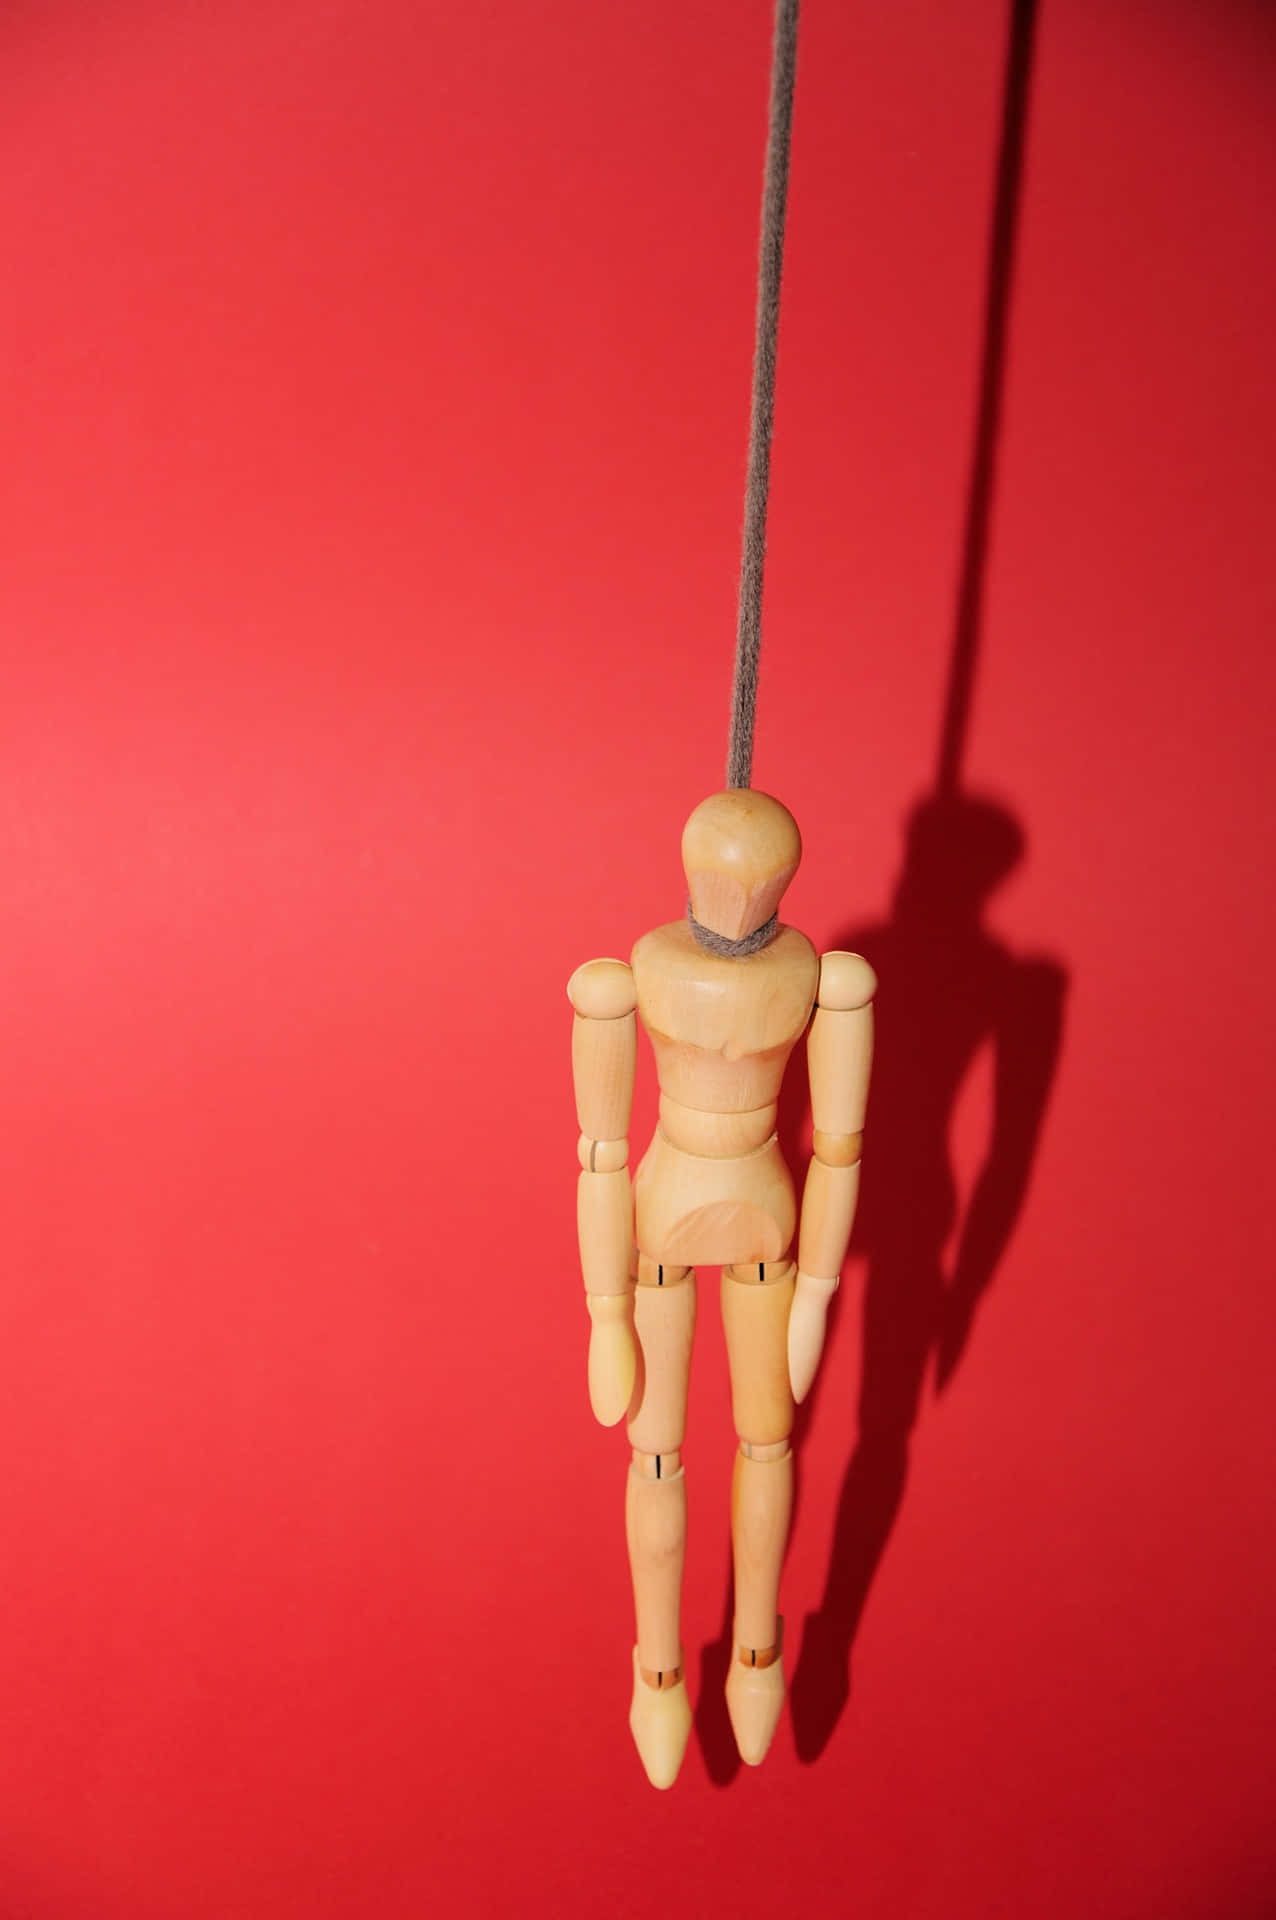 A Wooden Mannequin Hanging From A String